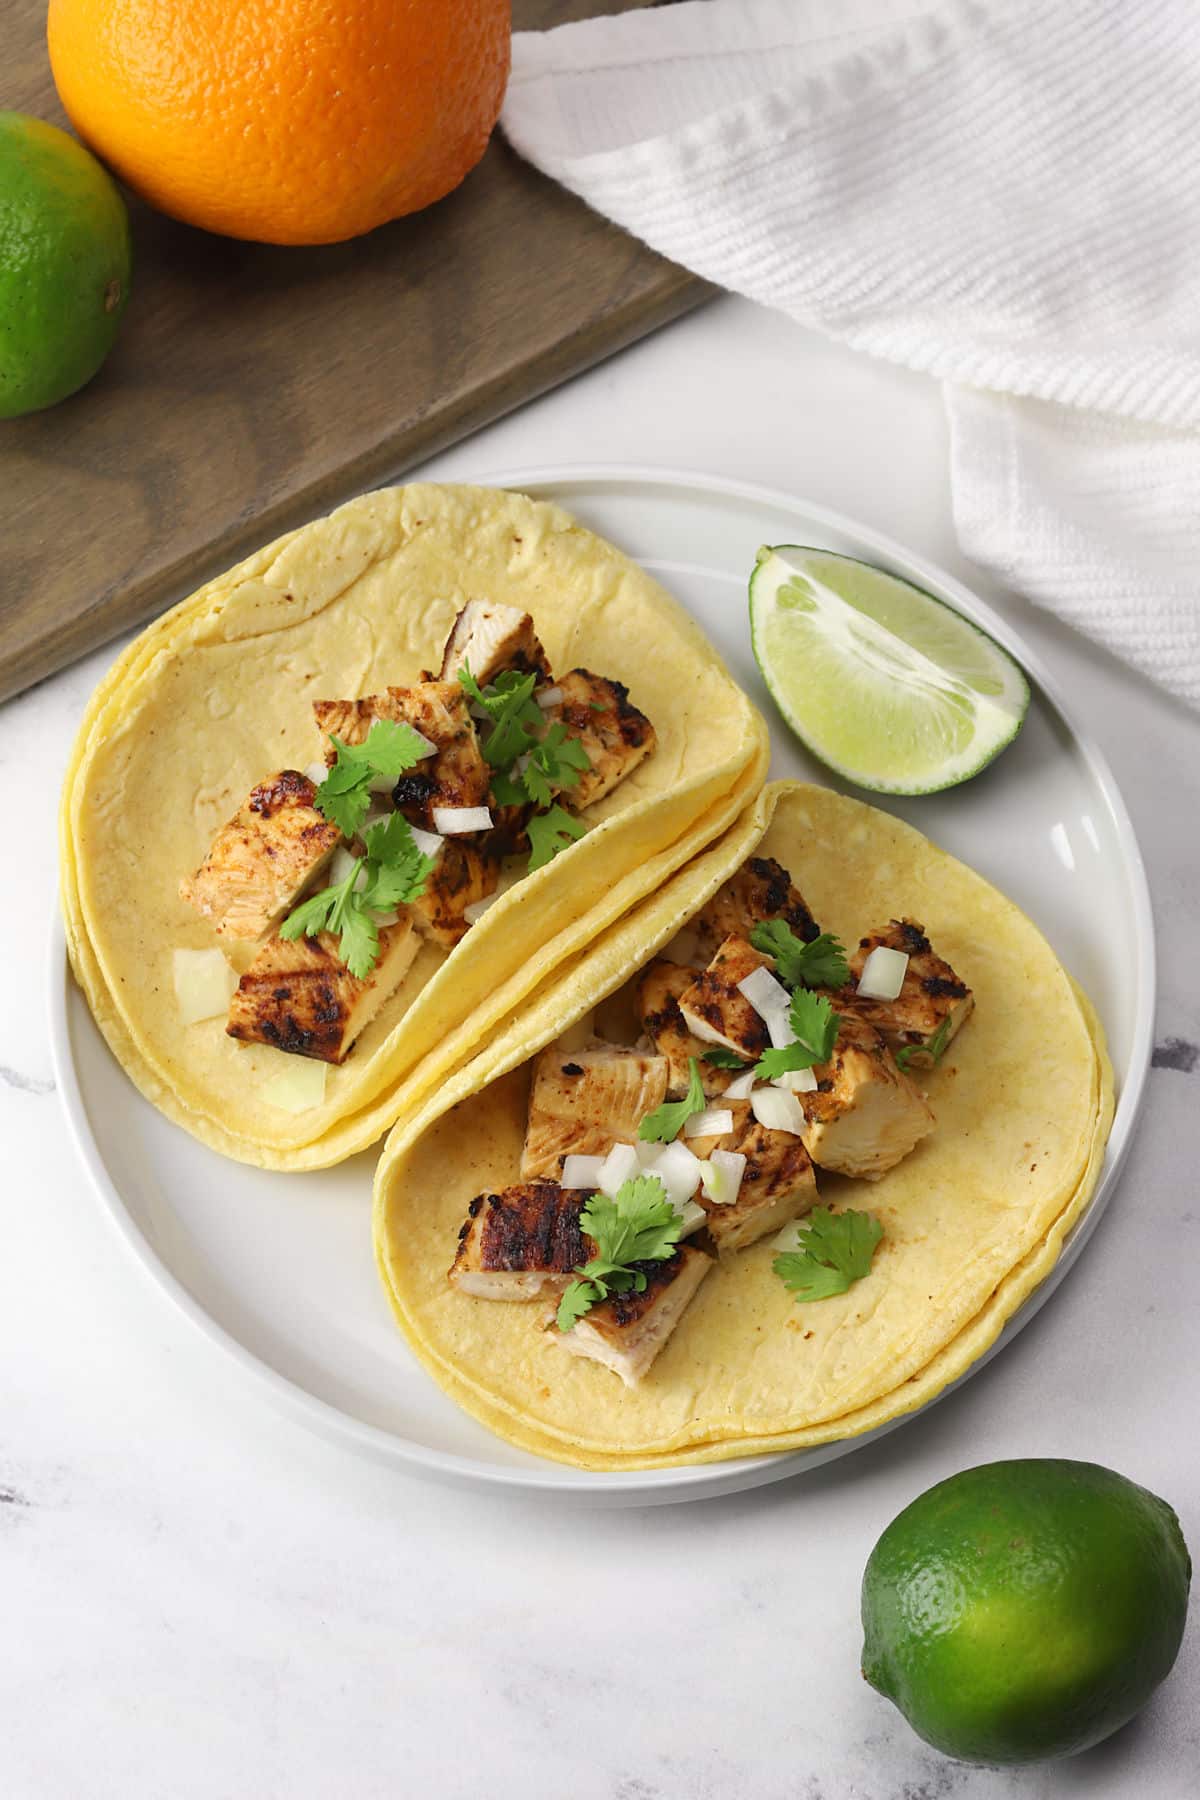 Two grilled chicken tacos in corn tortillas on a white plate.